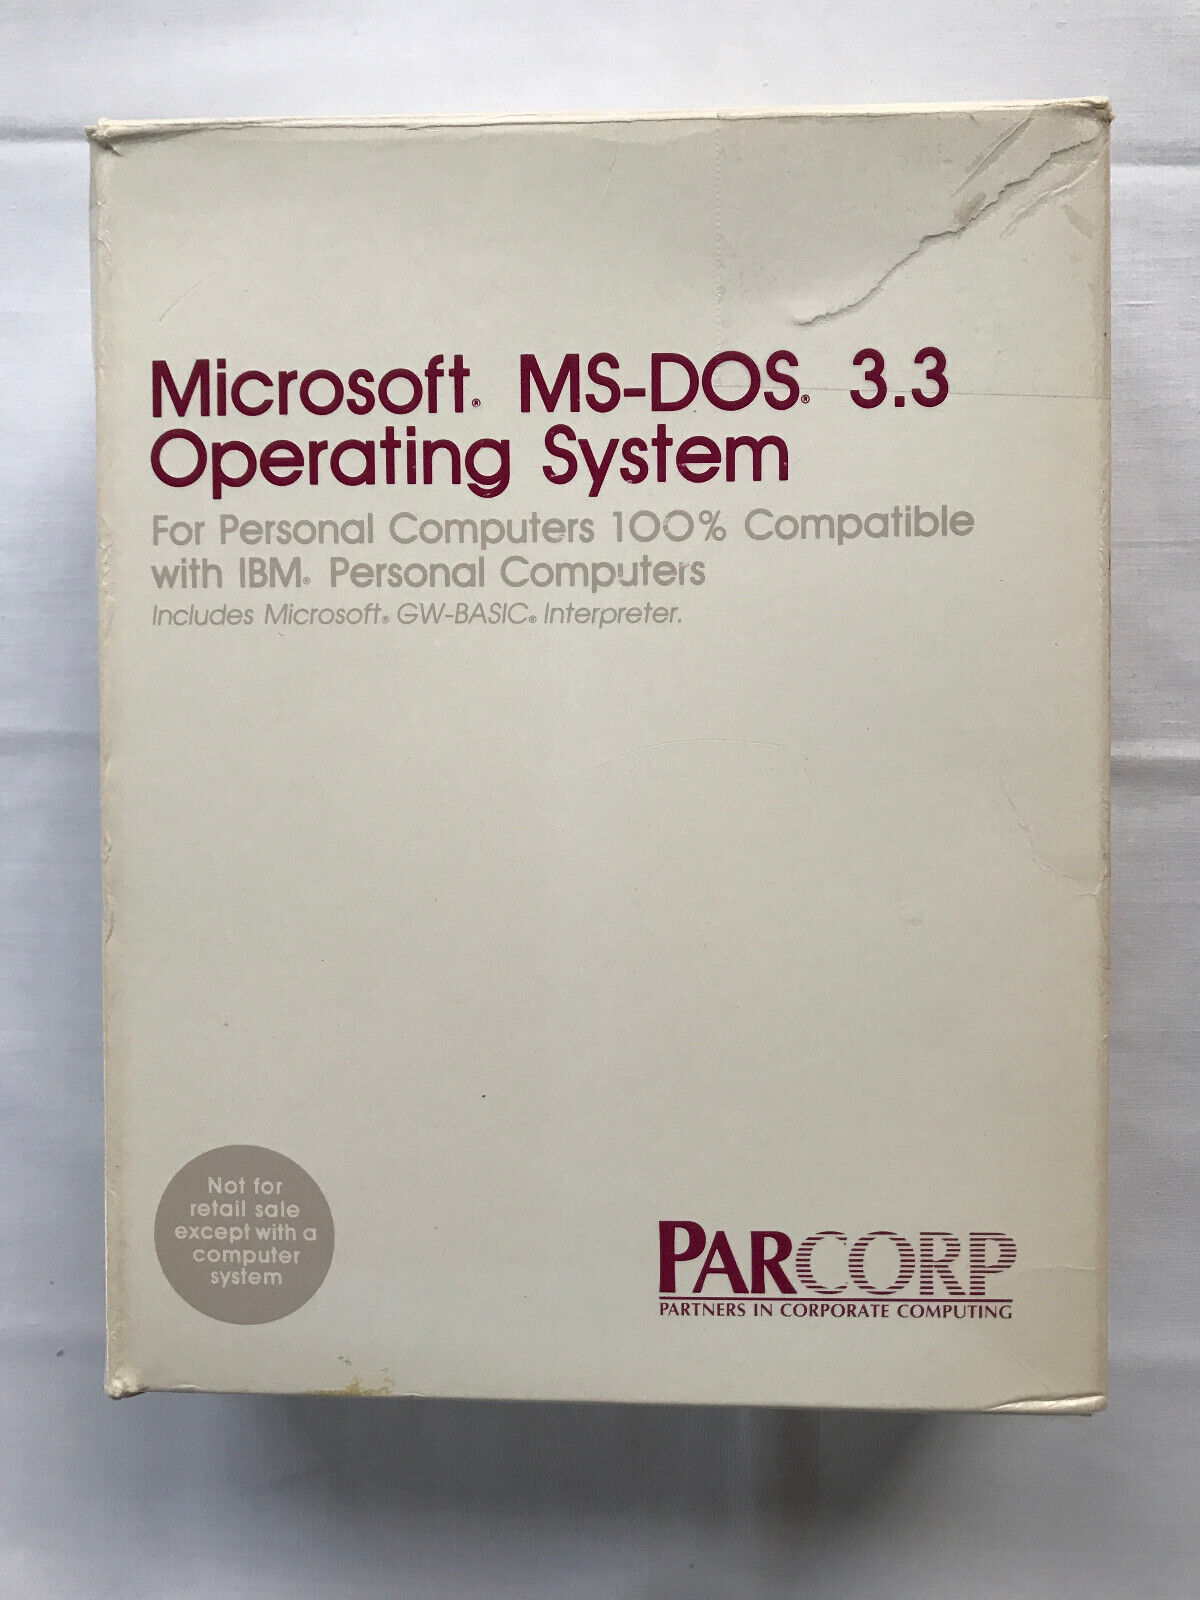 Vintage Microsoft MS-DOS 3.3 Operating System, Manuals & 5.25 Floppy Discs, 1987